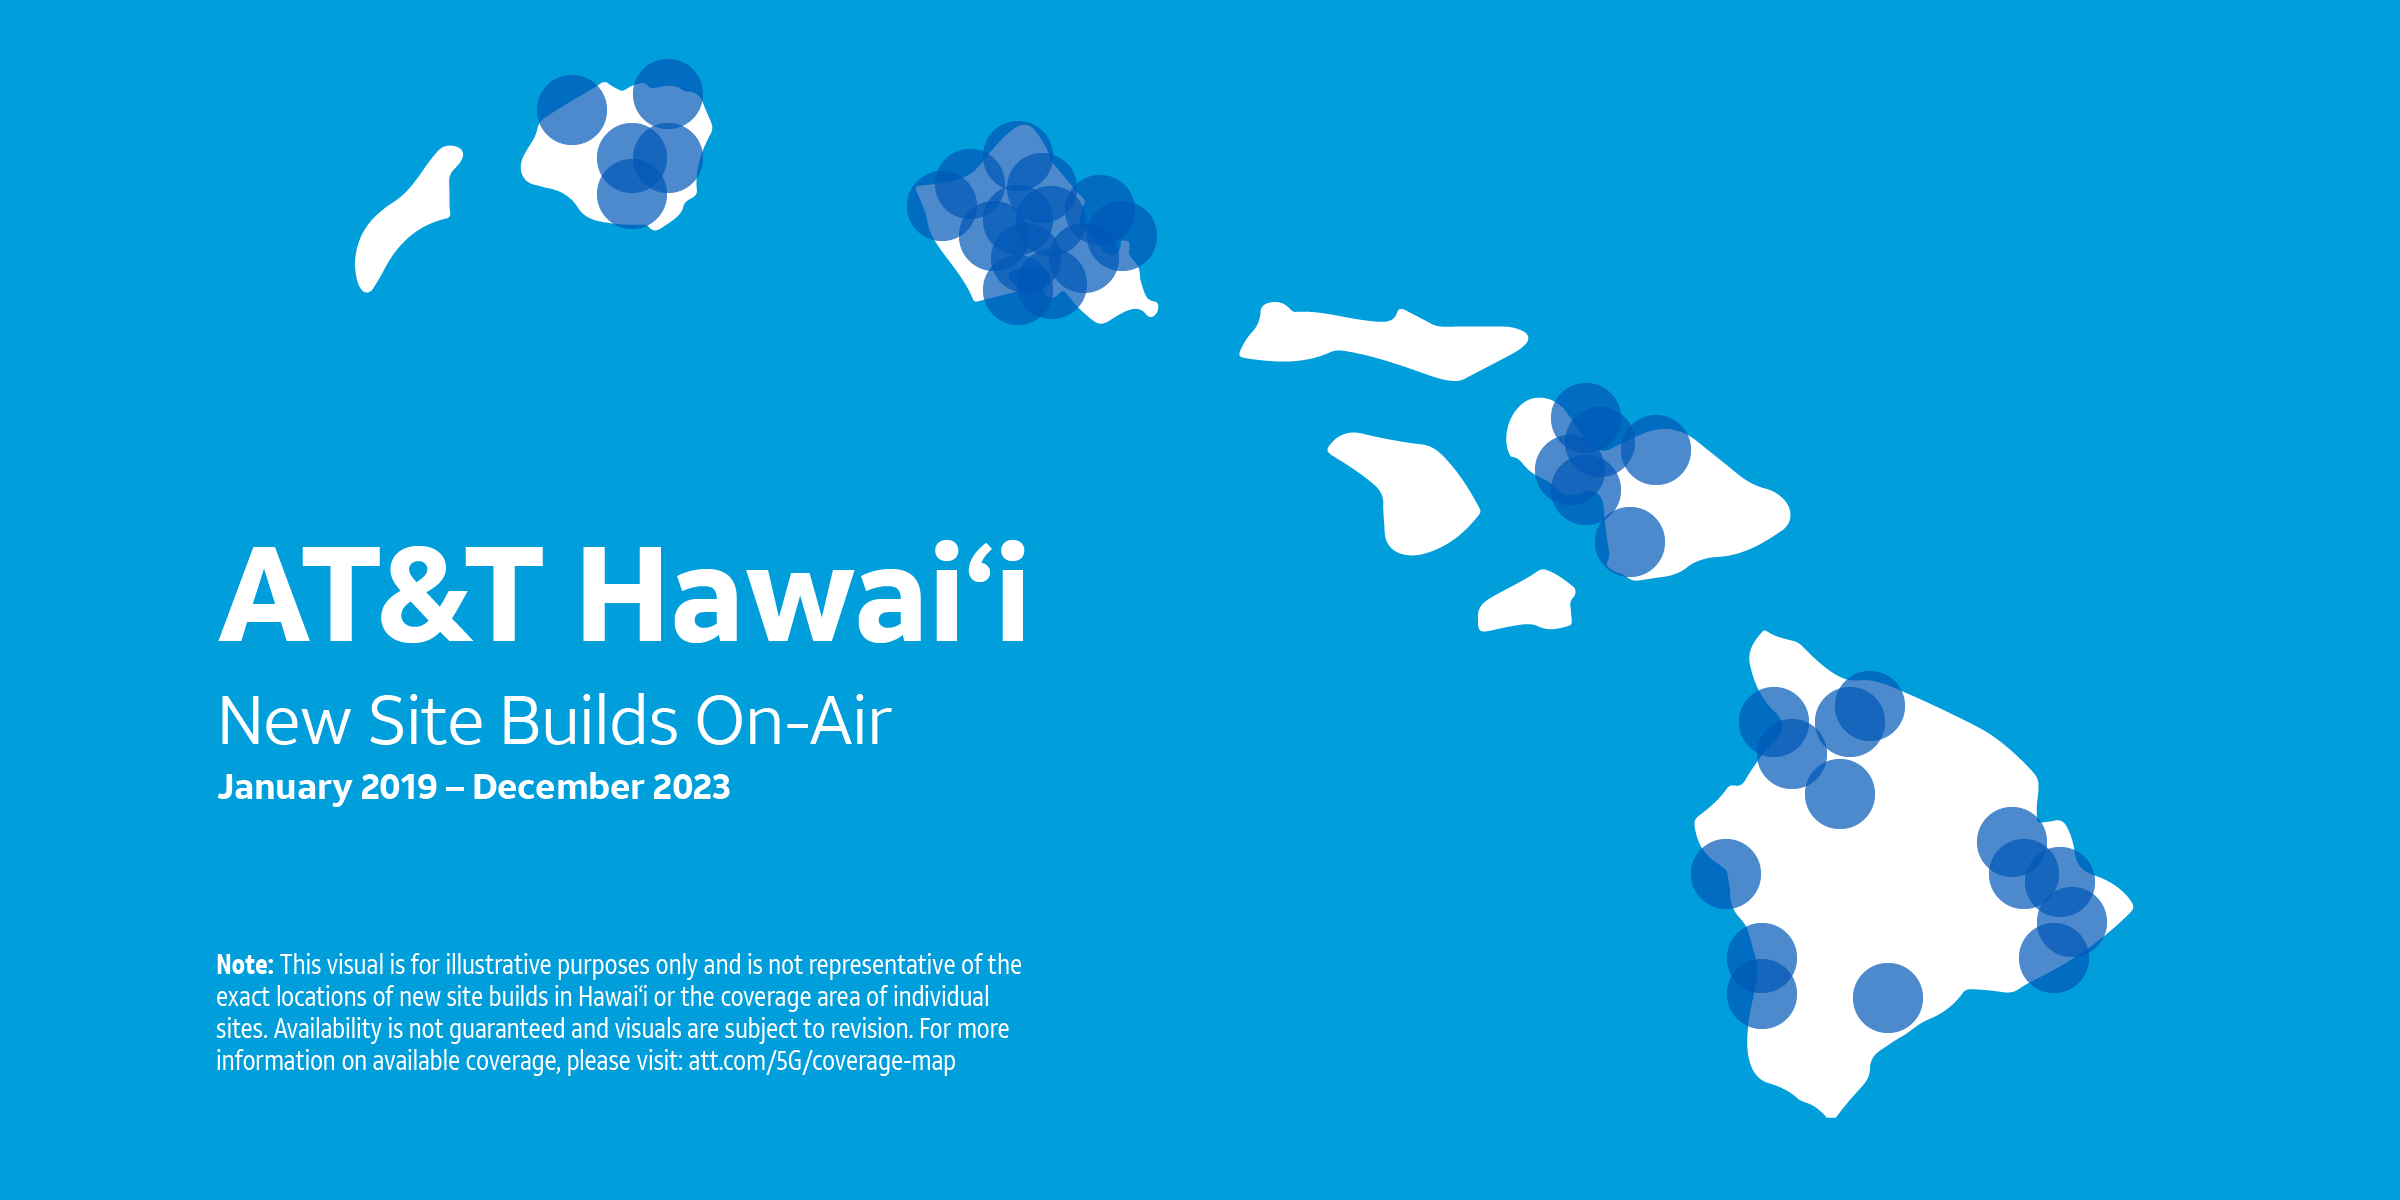 AT&T Hawai'i New Site Builds On-Air